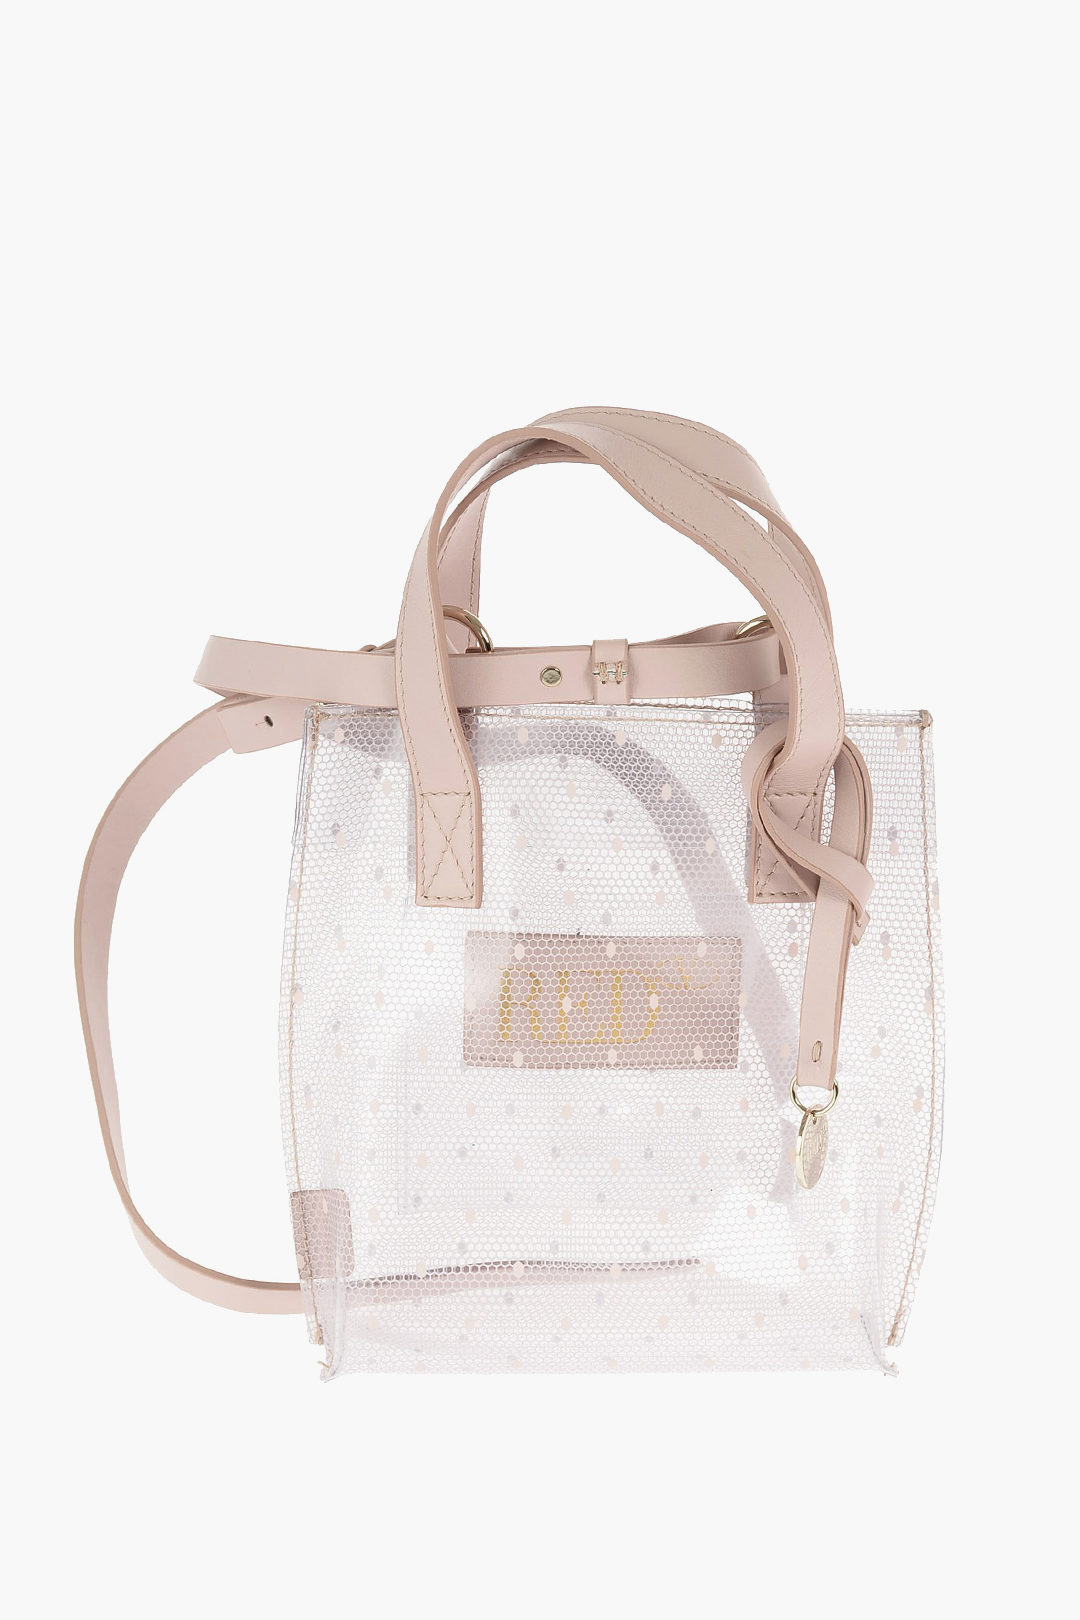 Red Valentino White PVC and Leather Crossbody Bag